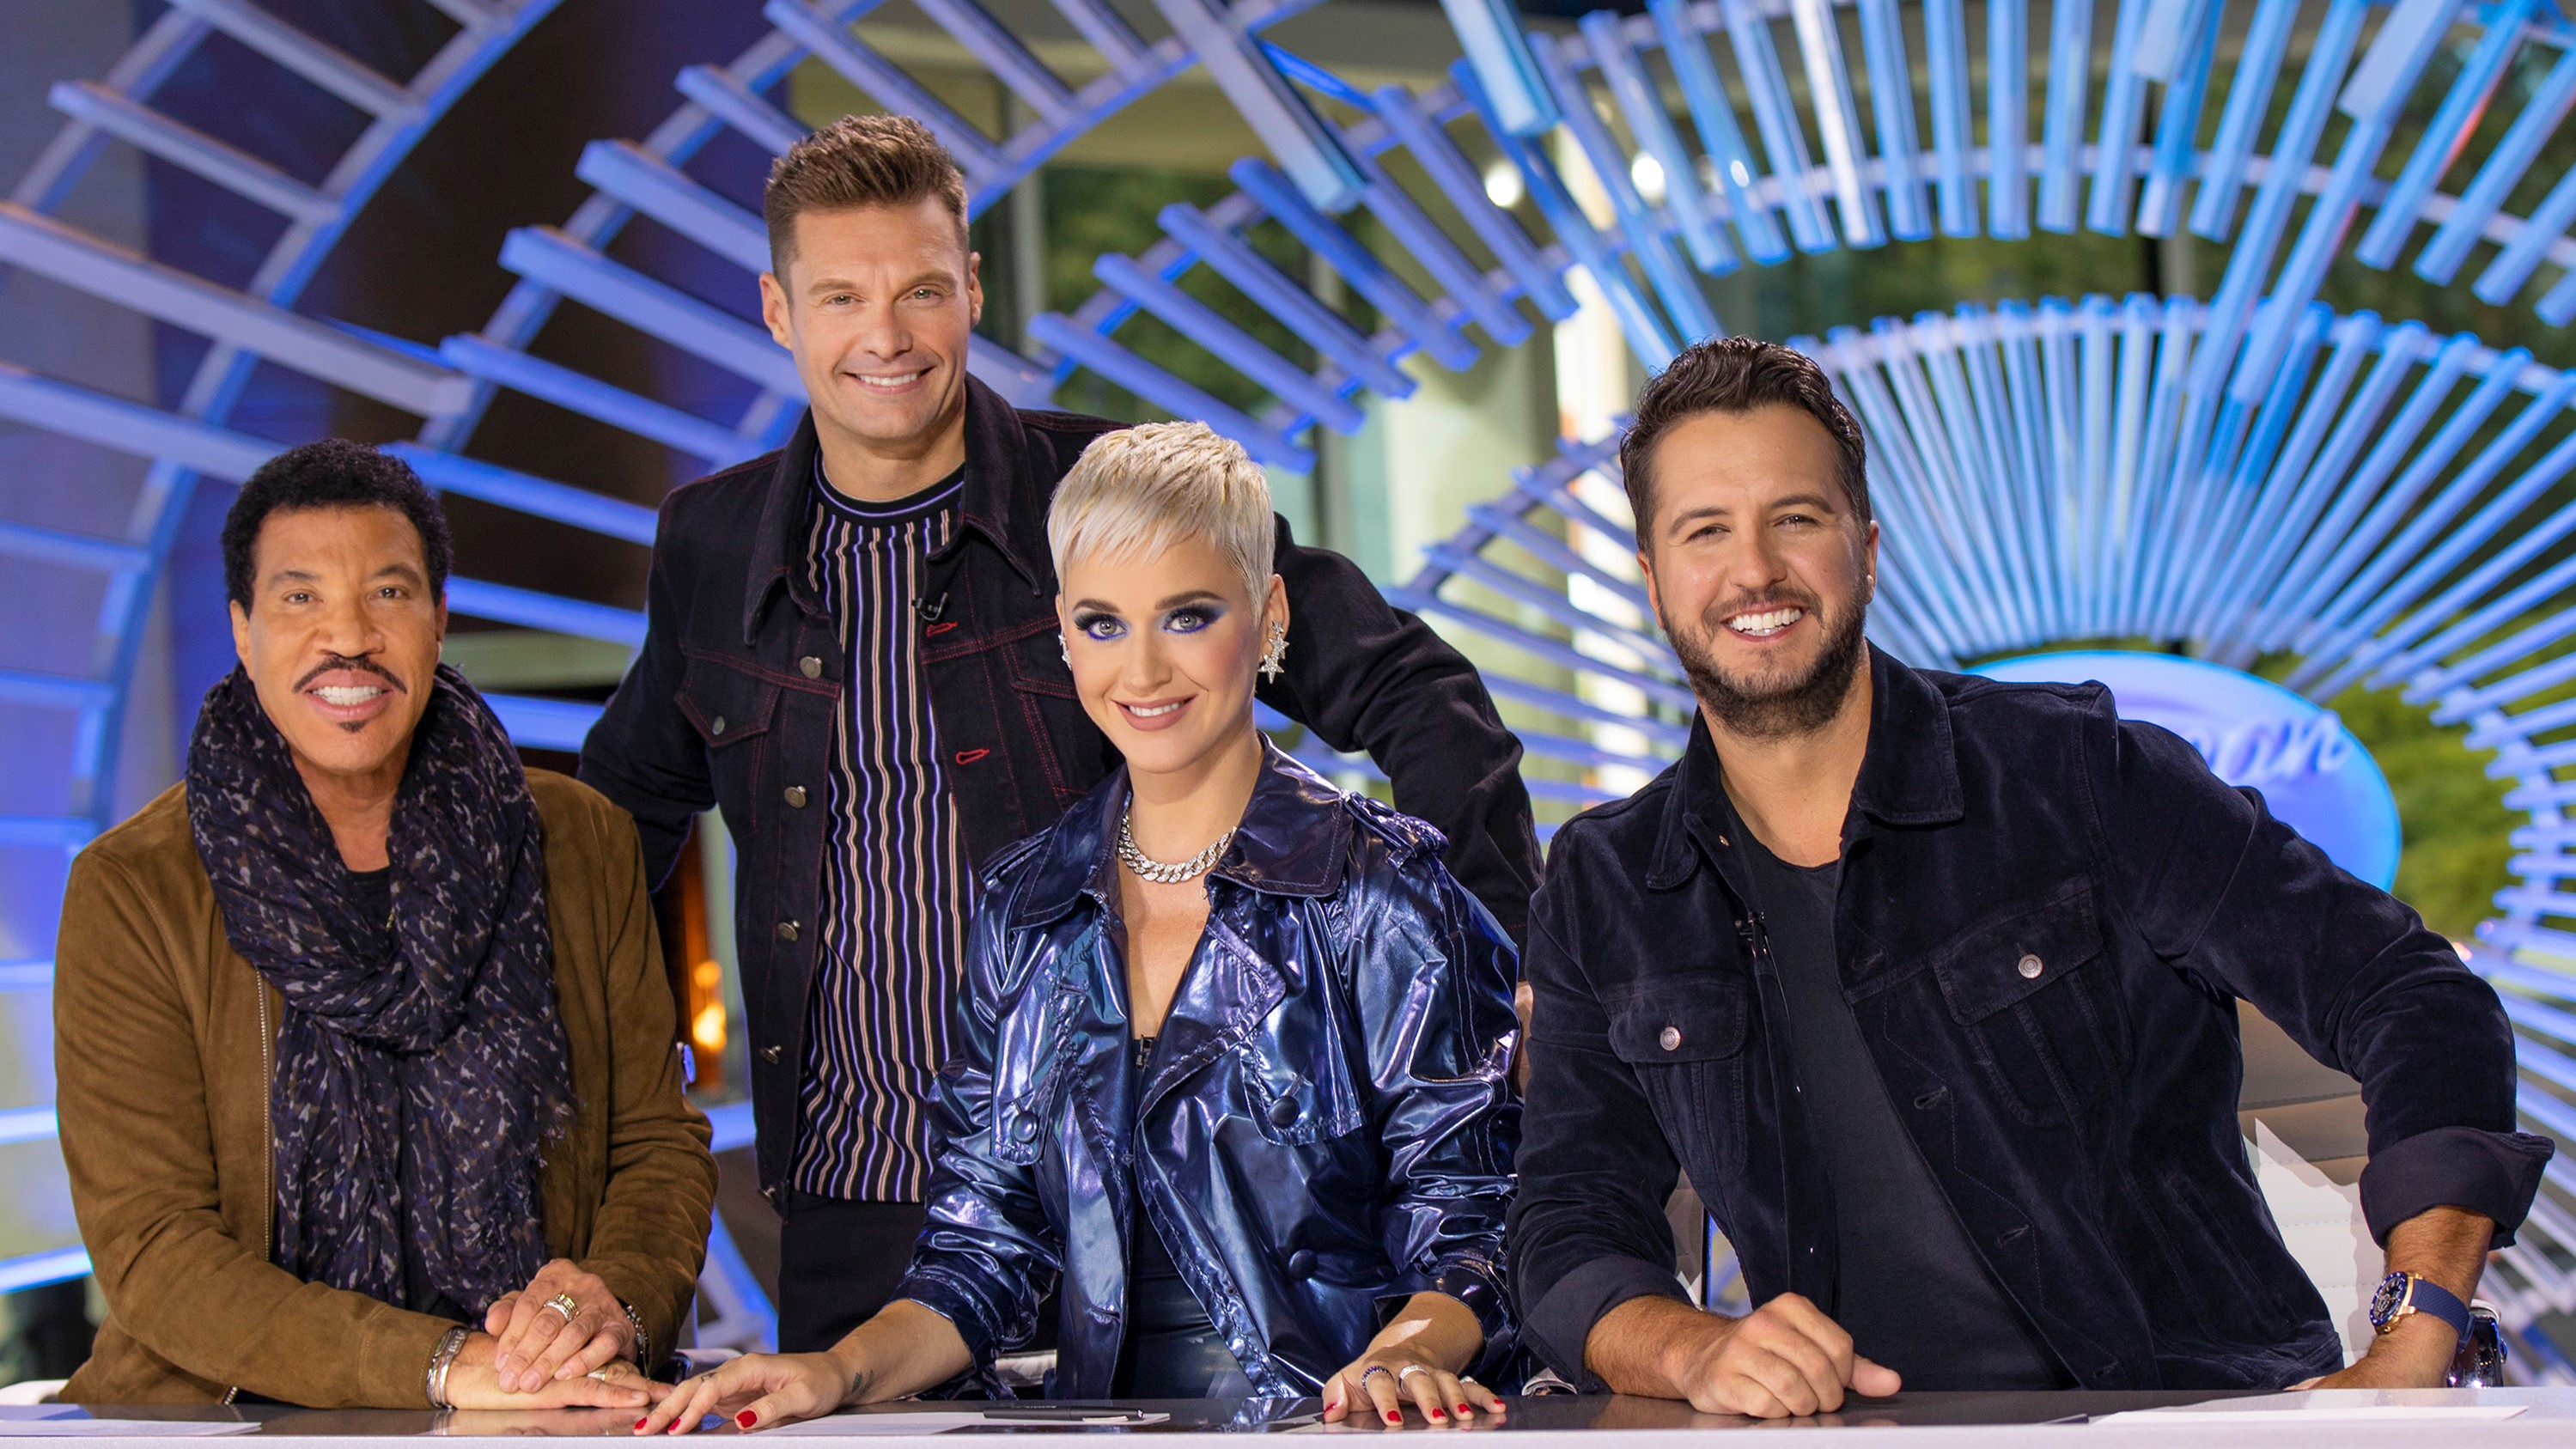 How to watch American Idol online stream season 18 live from anywhere